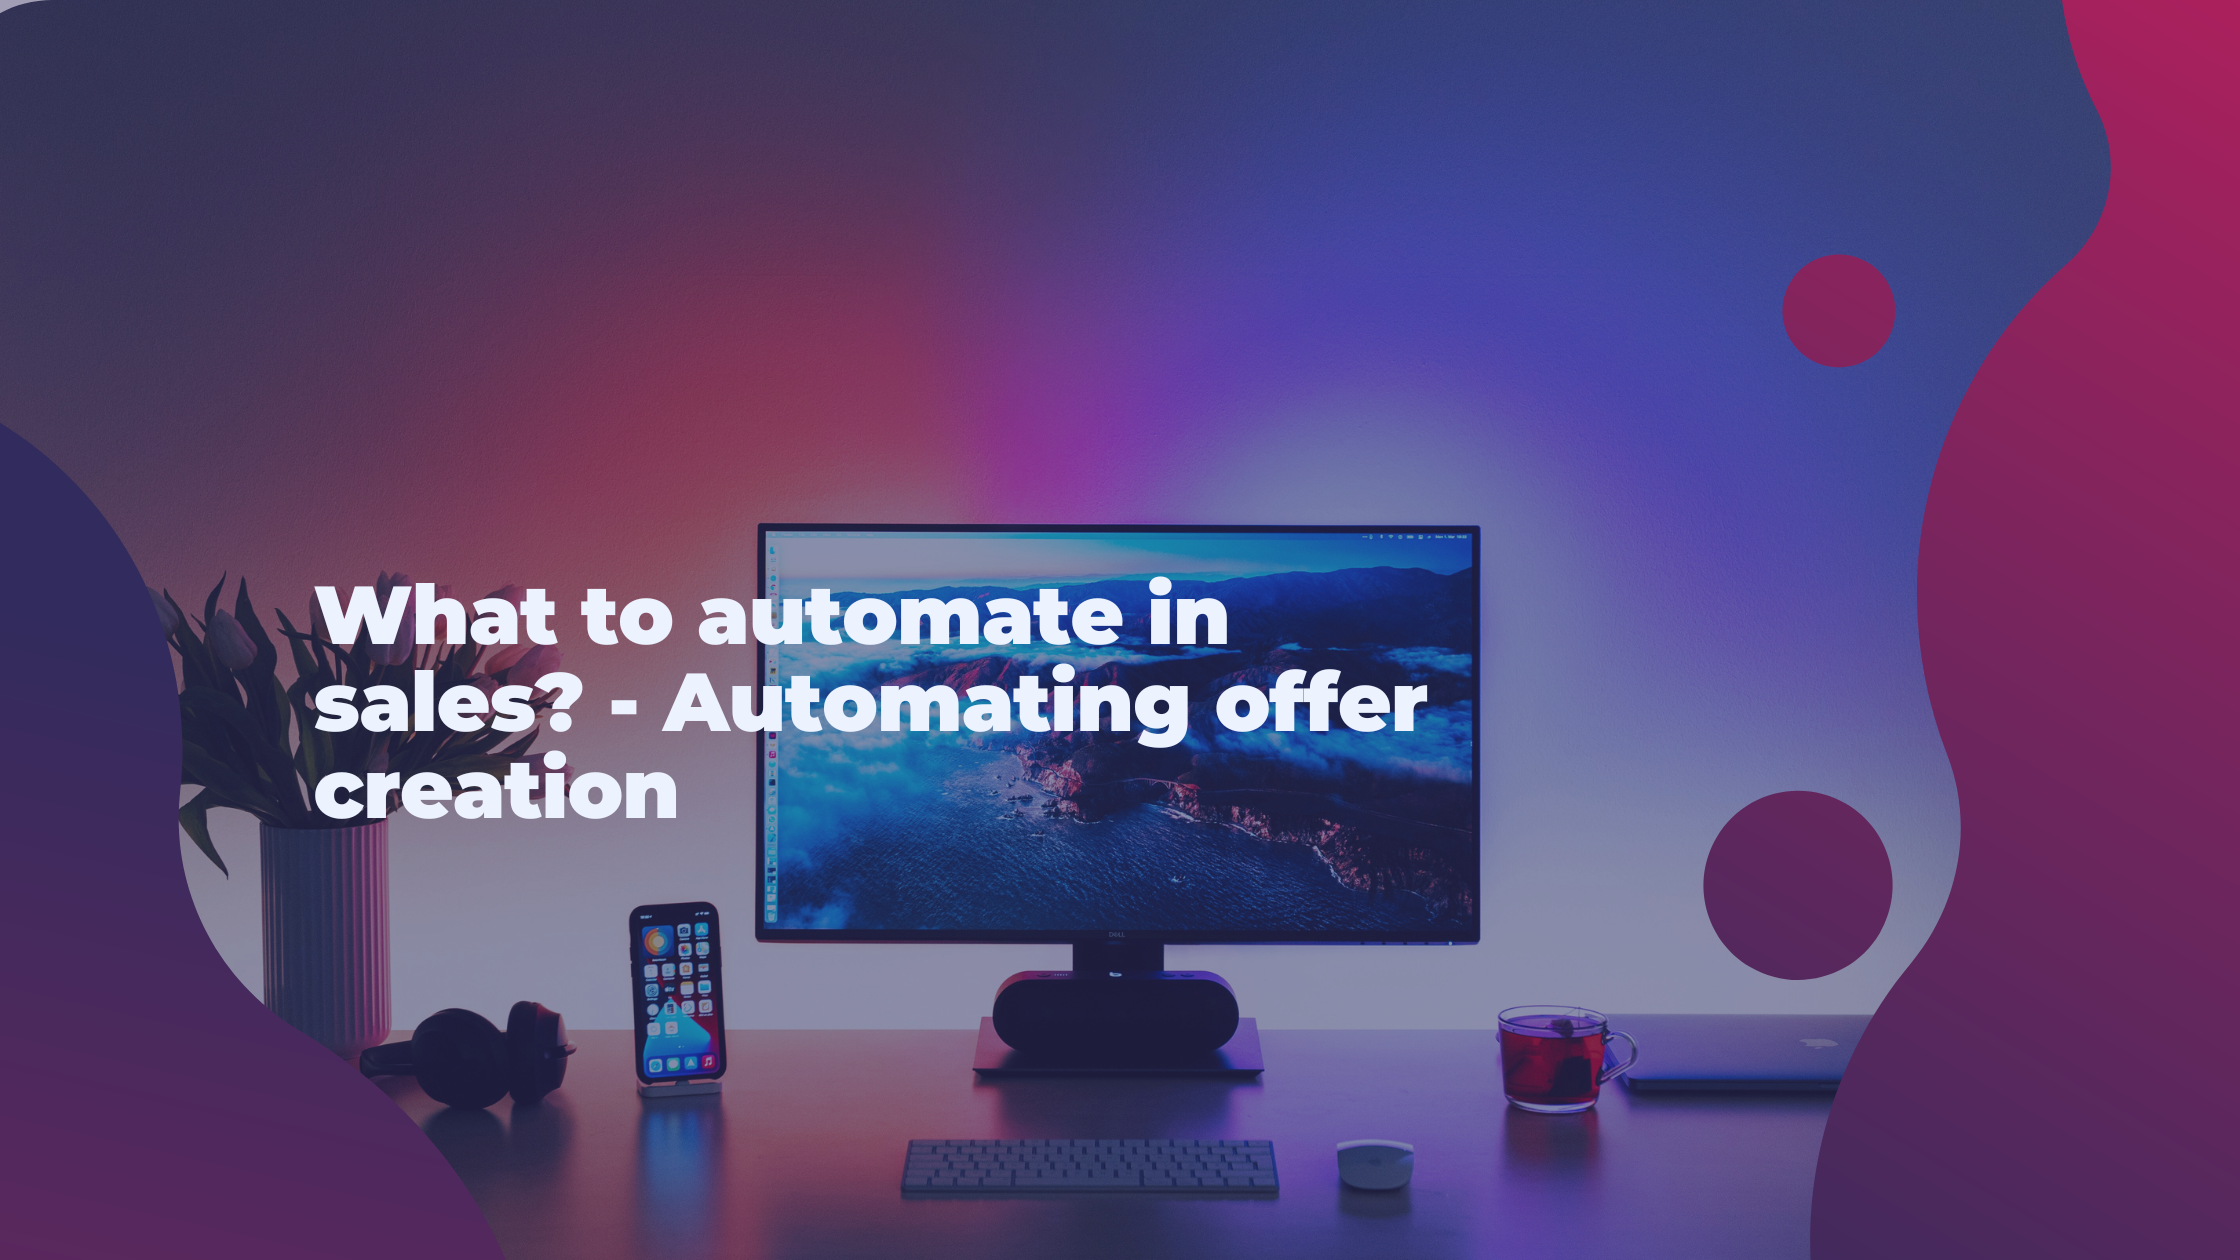 What to automate in sales? - Automating offer creation